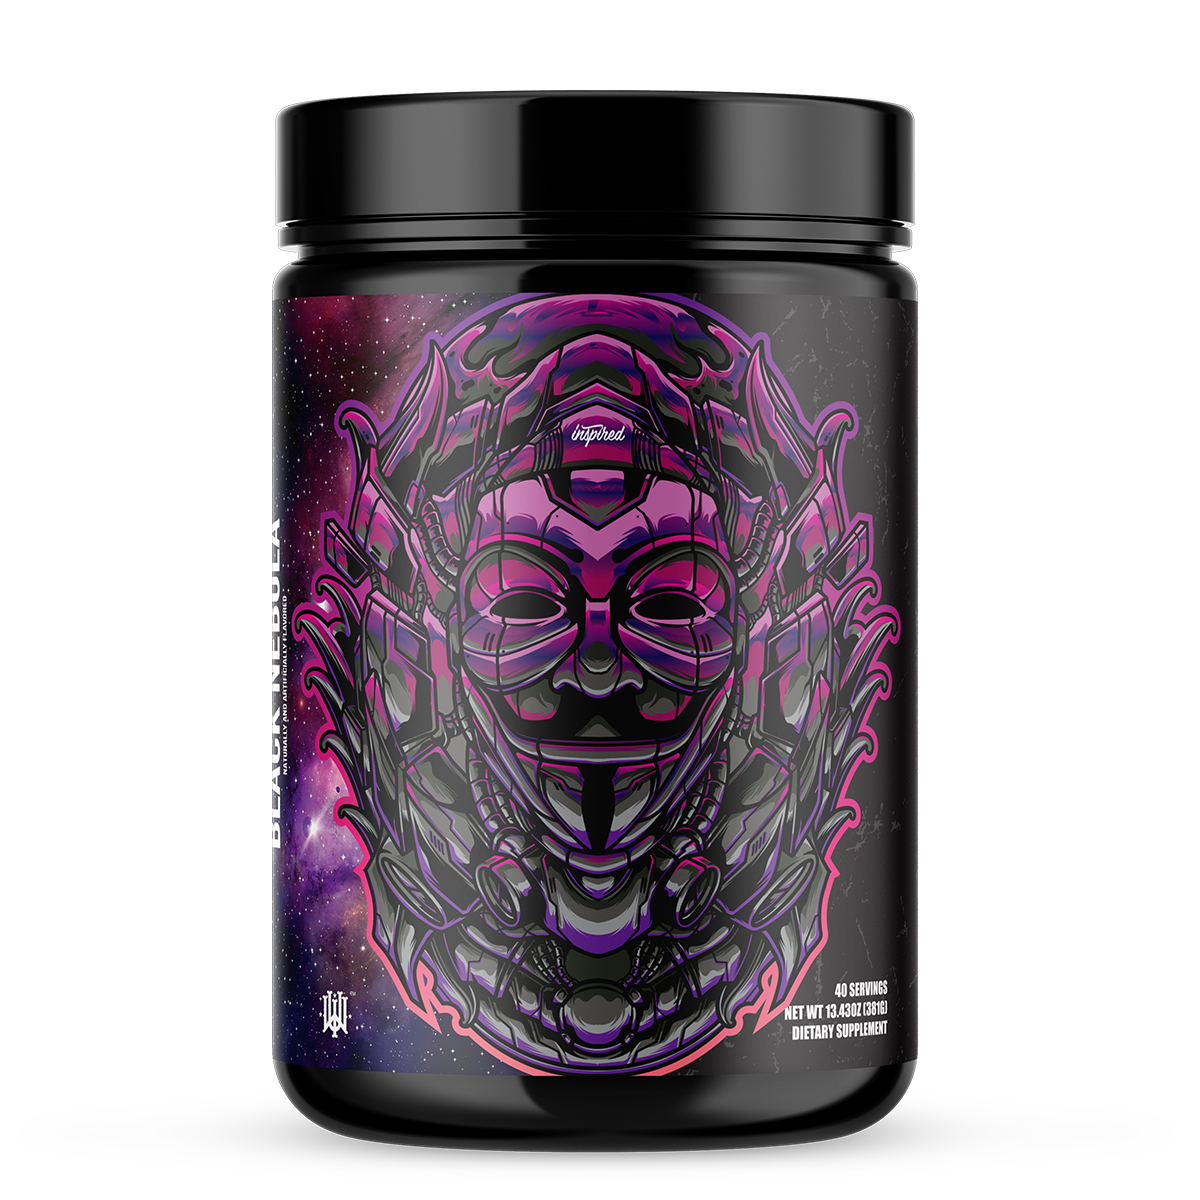 DVST8: of the Union Pre-Workout